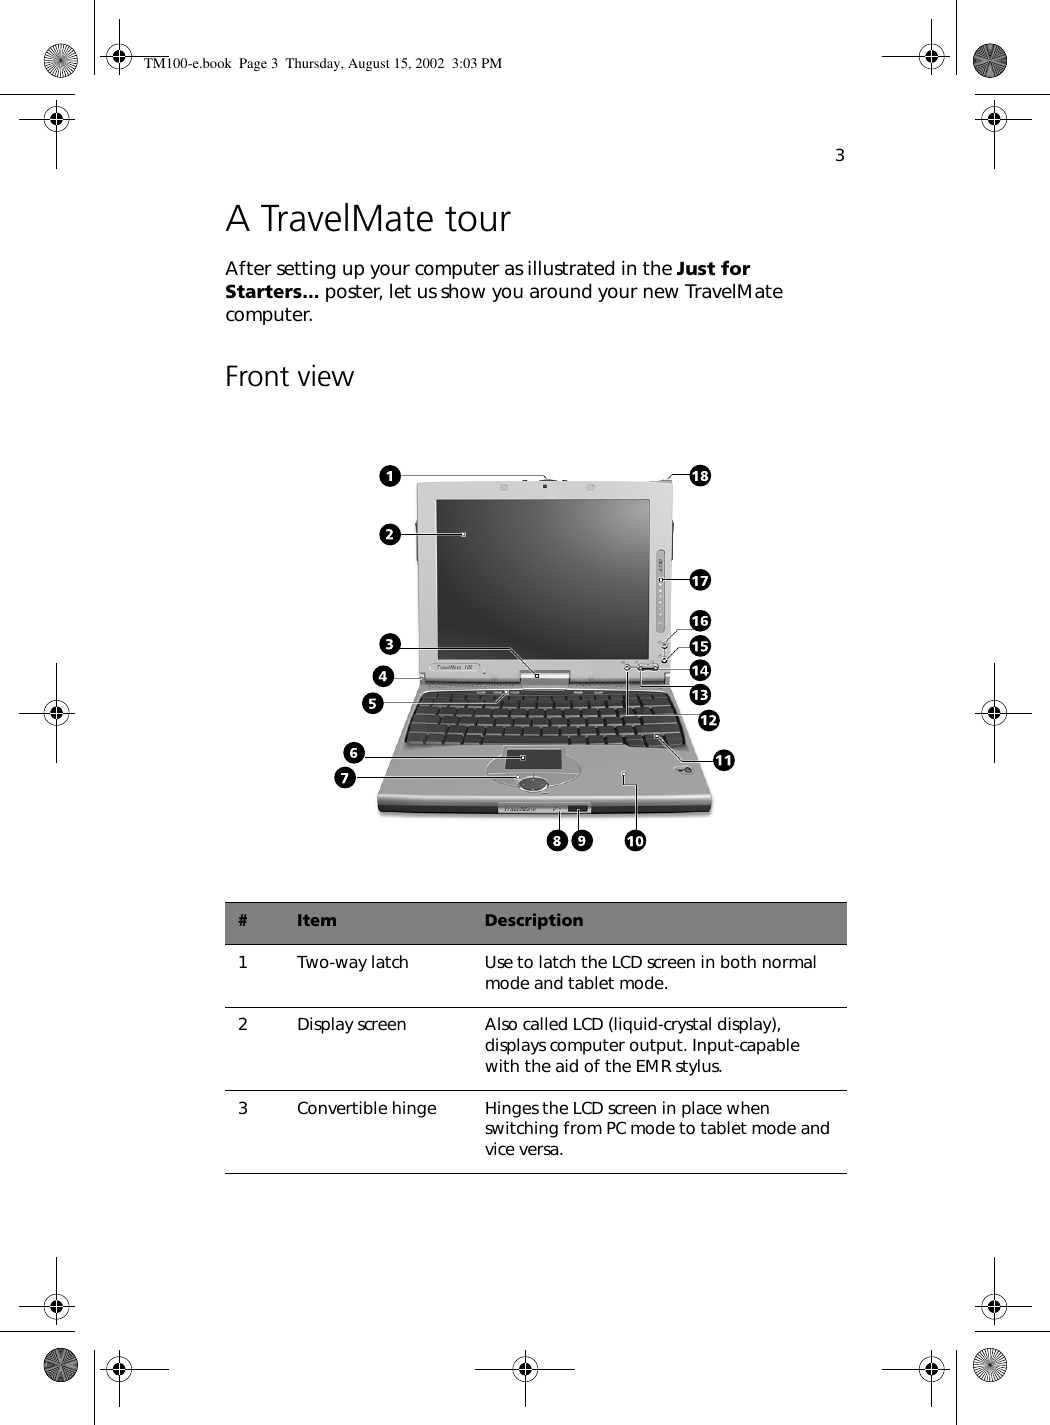 3A TravelMate tourAfter setting up your computer as illustrated in the Just for Starters... poster, let us show you around your new TravelMate computer.Front view#Item Description1 Two-way latch Use to latch the LCD screen in both normal mode and tablet mode.2 Display screen Also called LCD (liquid-crystal display), displays computer output. Input-capable with the aid of the EMR stylus.3 Convertible hinge Hinges the LCD screen in place when switching from PC mode to tablet mode and vice versa.TM100-e.book Page 3 Thursday, August 15, 2002 3:03 PM